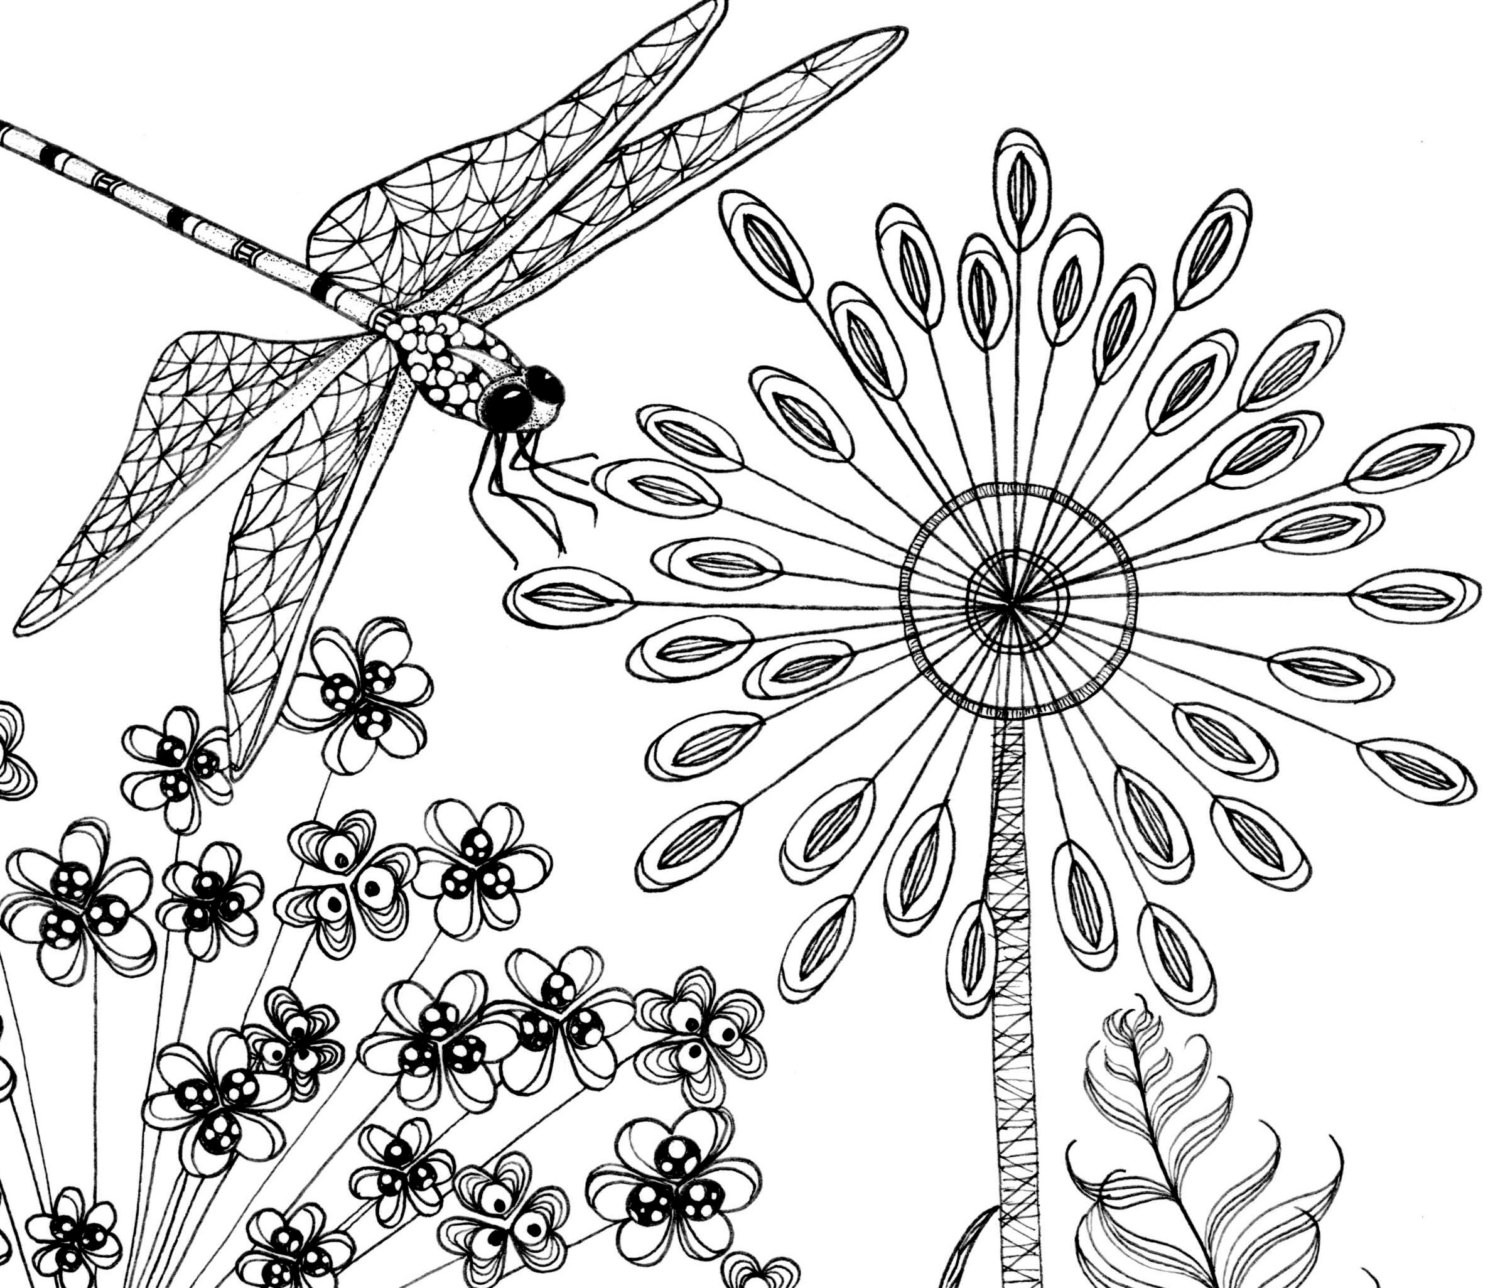 Dragonfly Coloring Pages For Adults
 Printable coloring pages of a flower illustration & dragonfly